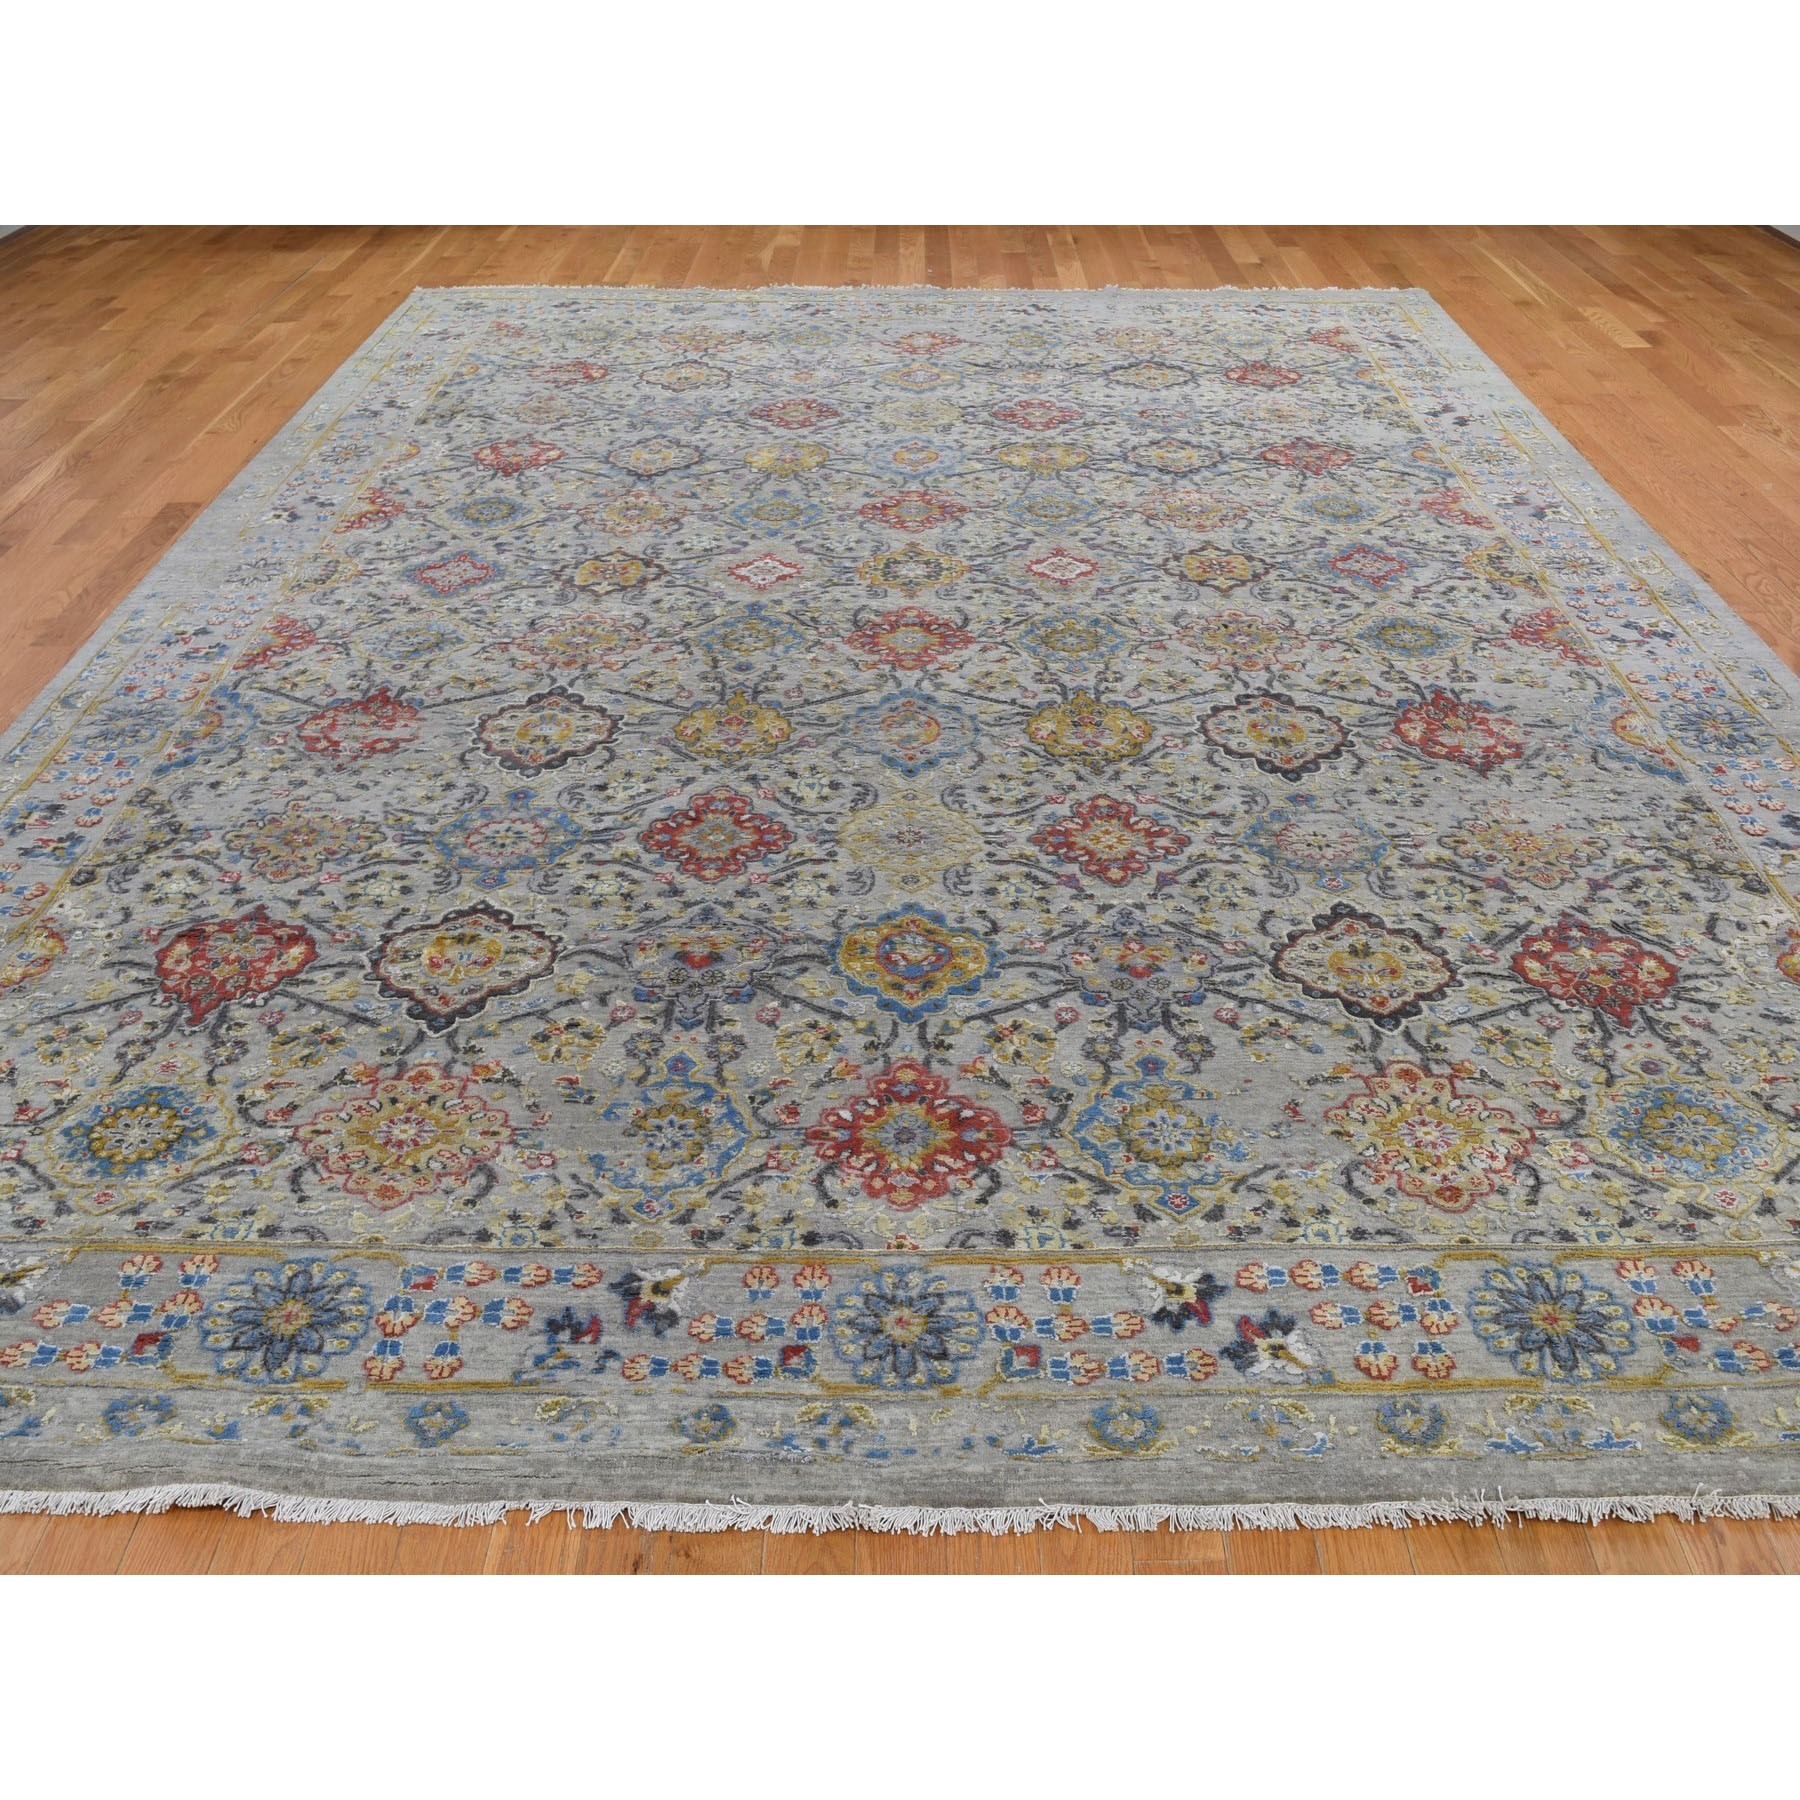 9-1 x12- THE SUNSET ROSETTES Pure Silk and Wool Hand Knotted Oriental Rug 